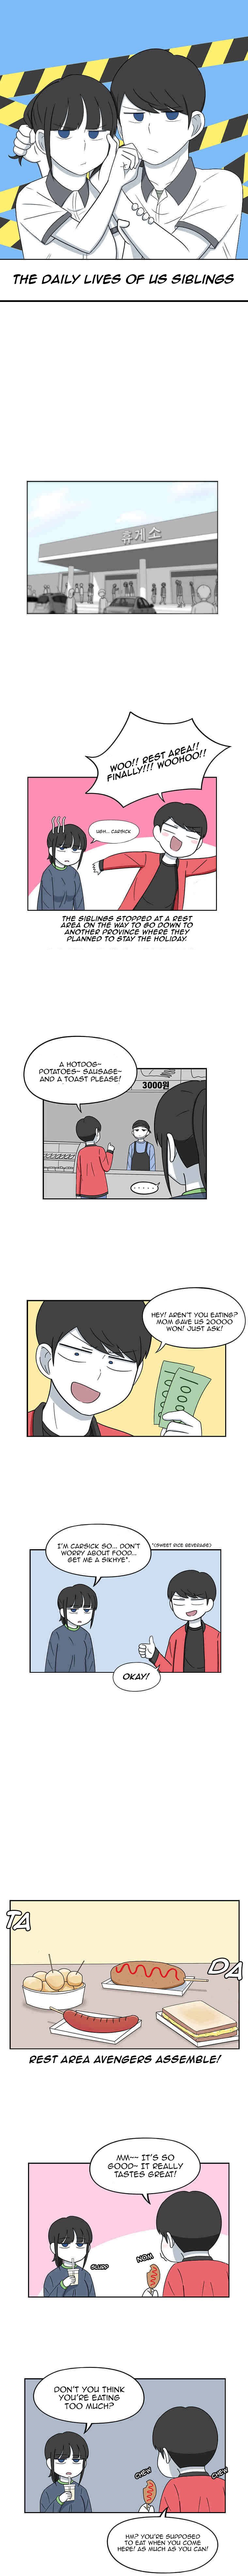 The Daily Lives of Us Siblings Vol. 1 Ch. 44 Chuseok (Part 1/2)